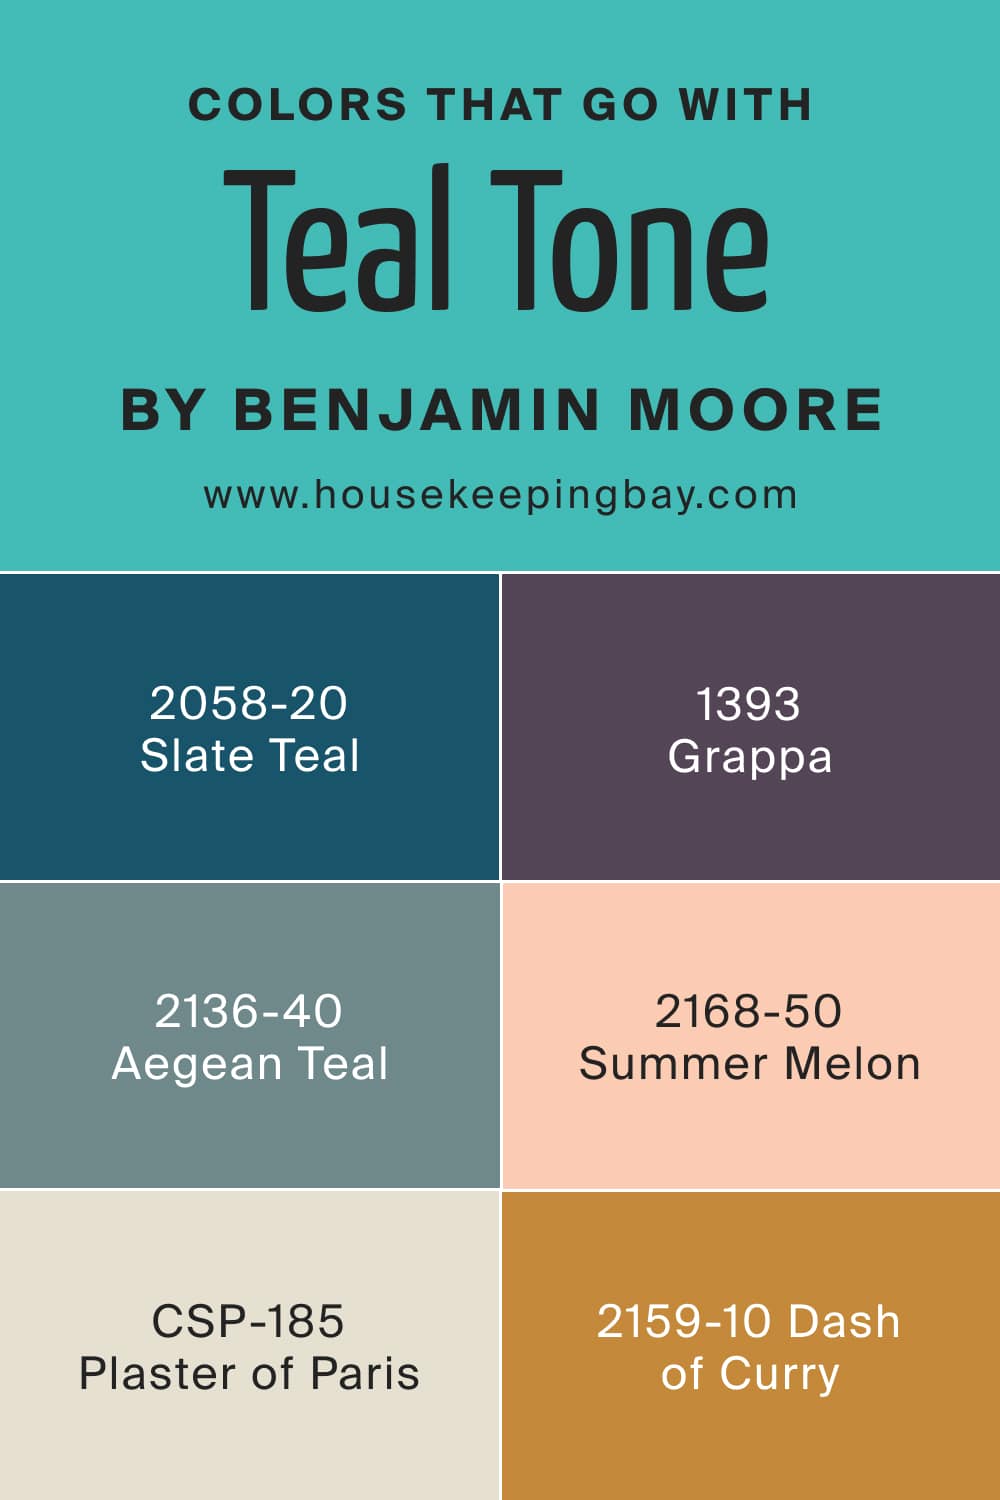 Colors that go with BM Teal Tone 663 by Benjamin Moore